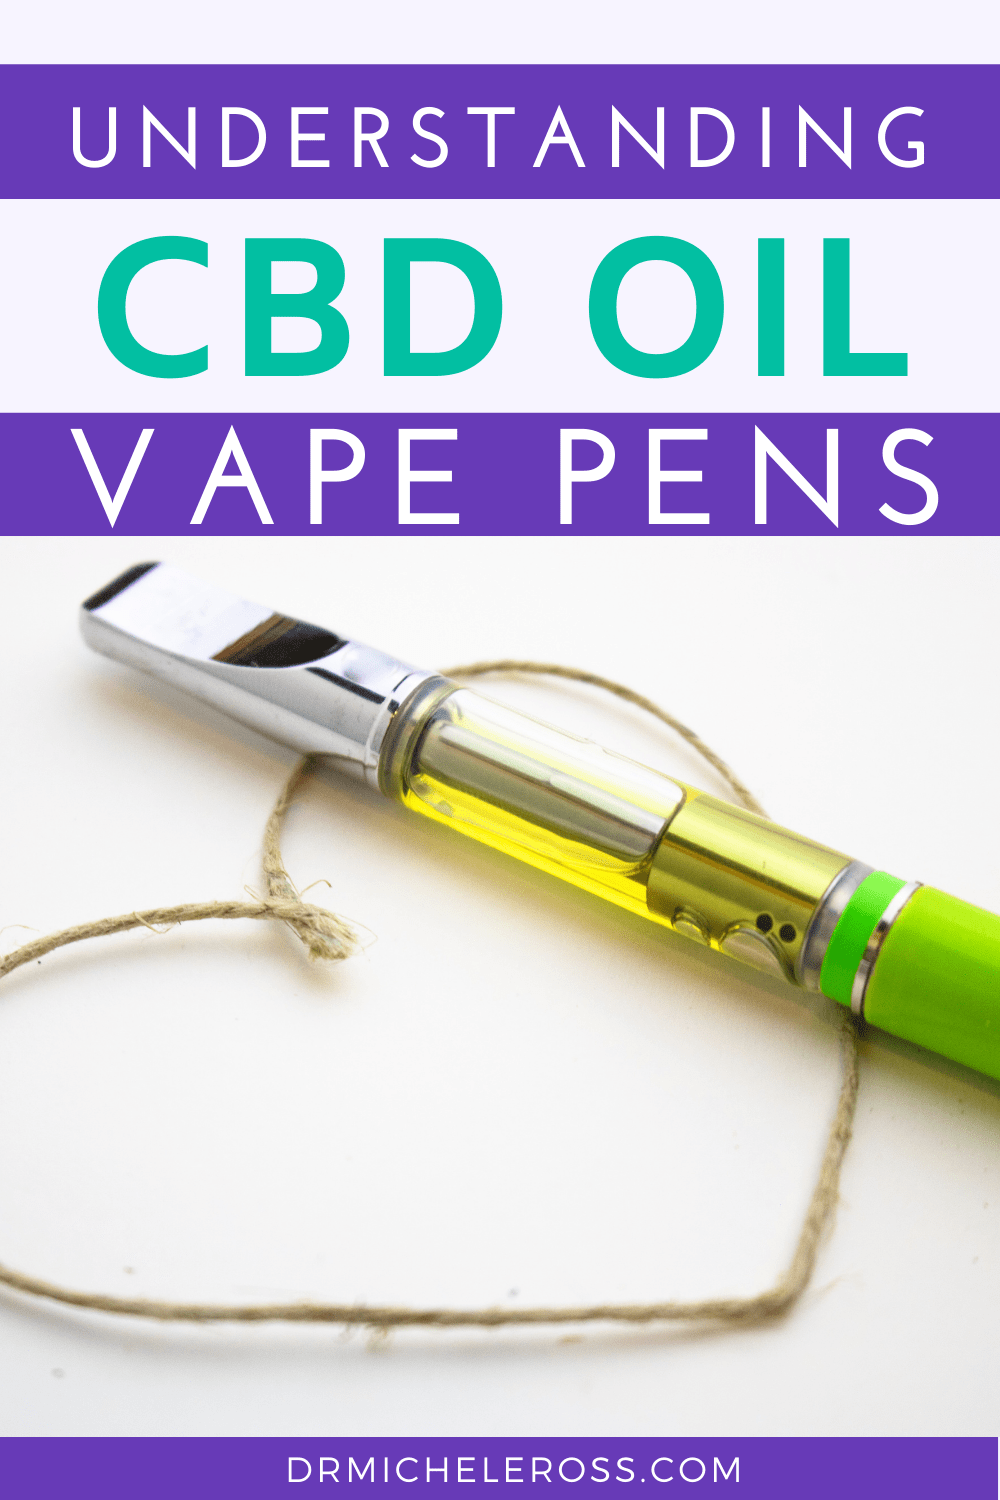 cbd oil can be vaped or smoked